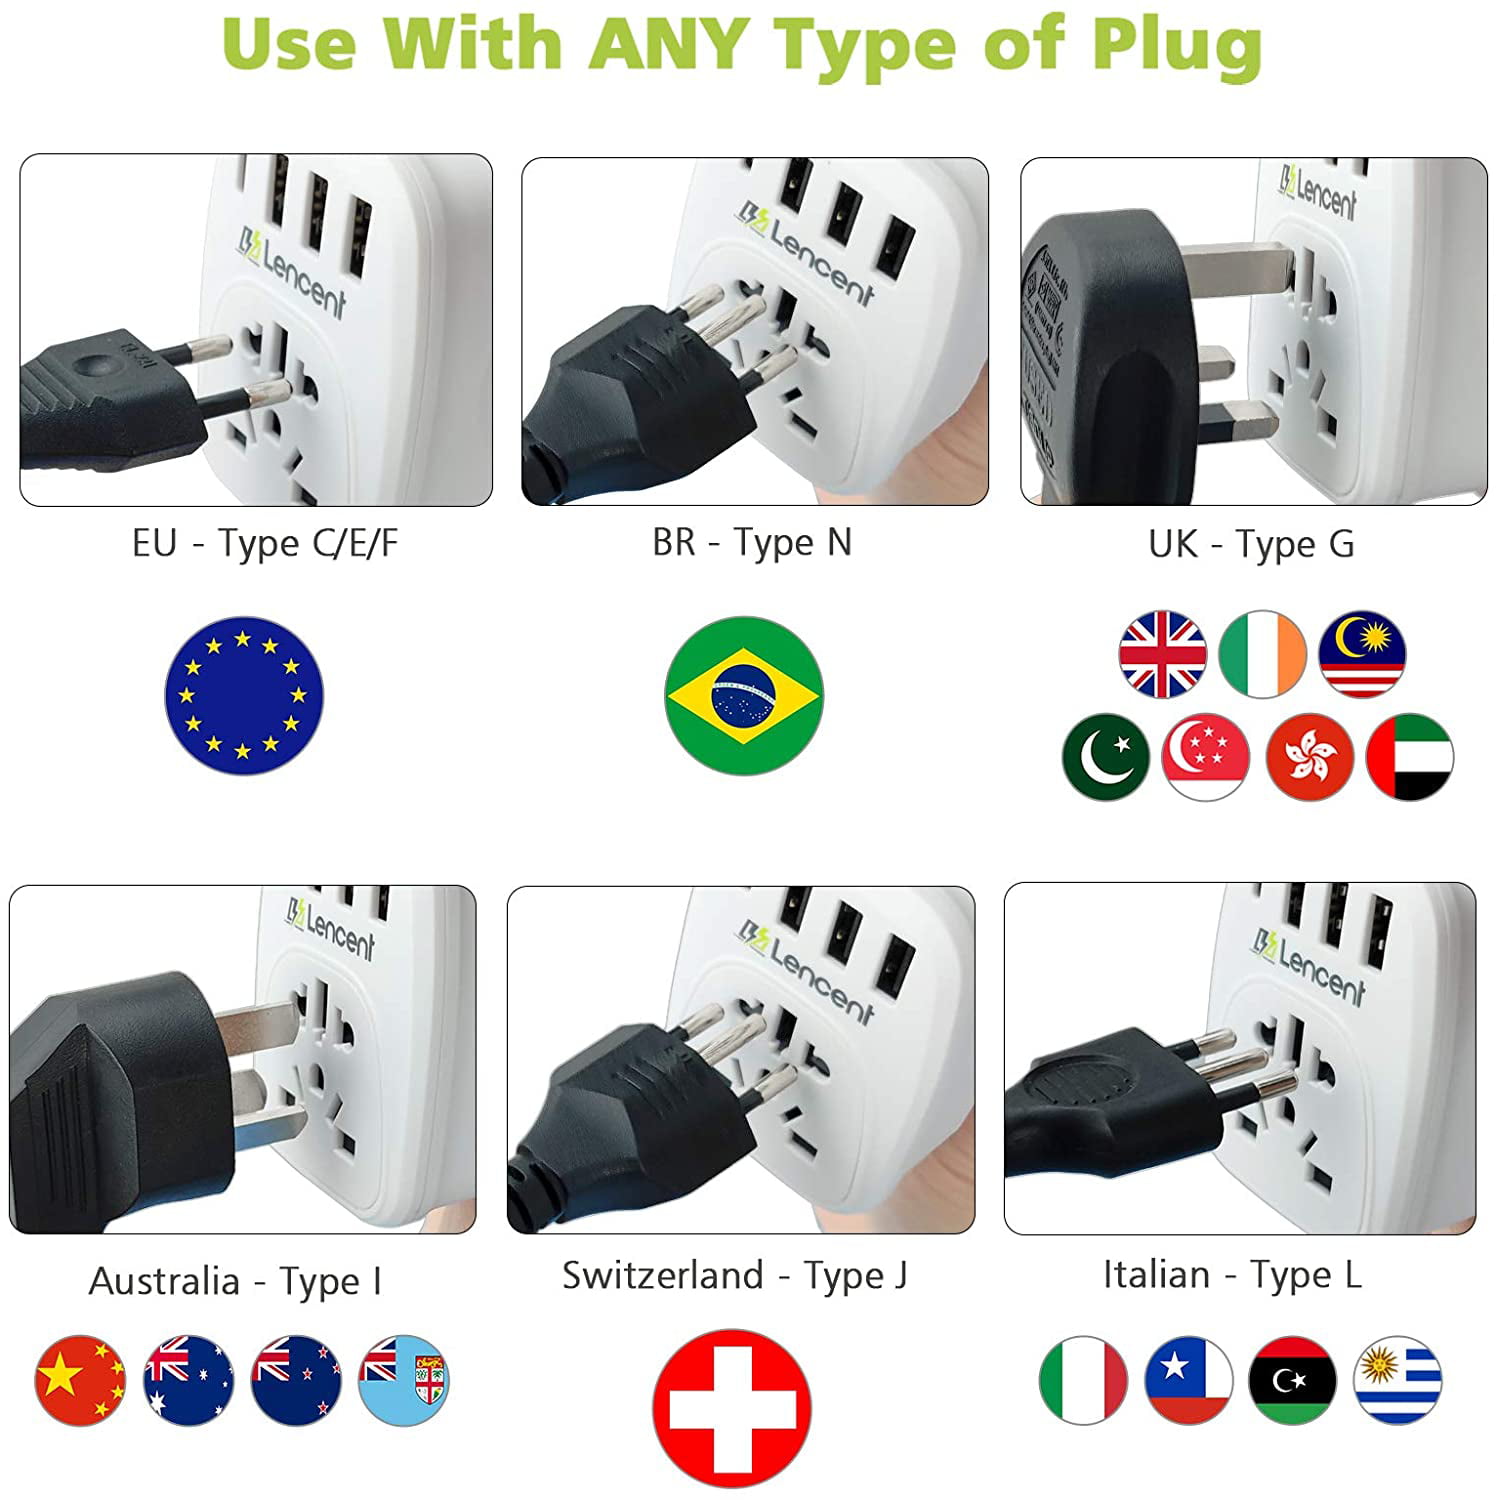 World to US Plug Adapter with 3 USB & 1 PD Type-c Quick Fast Charger Ports LENCENT Type B European EU Europe/UK/Australia/China to USA American Canada Japan Outlet Power Adaptor Travel Plug Converter 